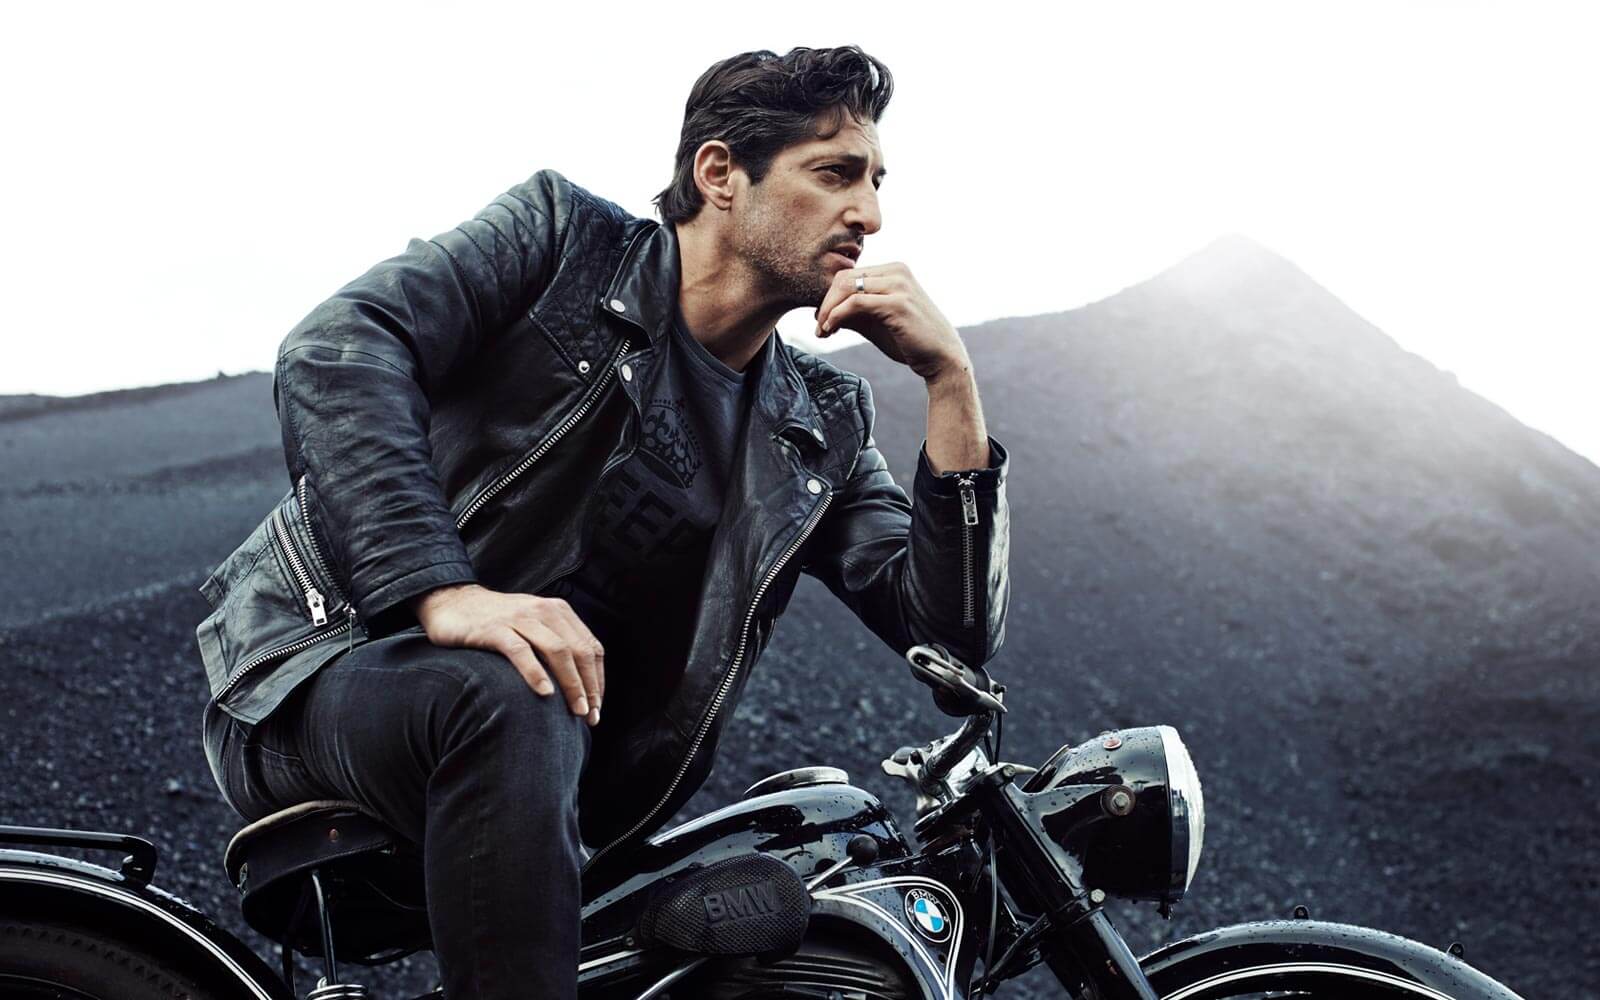 Man on motorcycle wearing a leather jacket